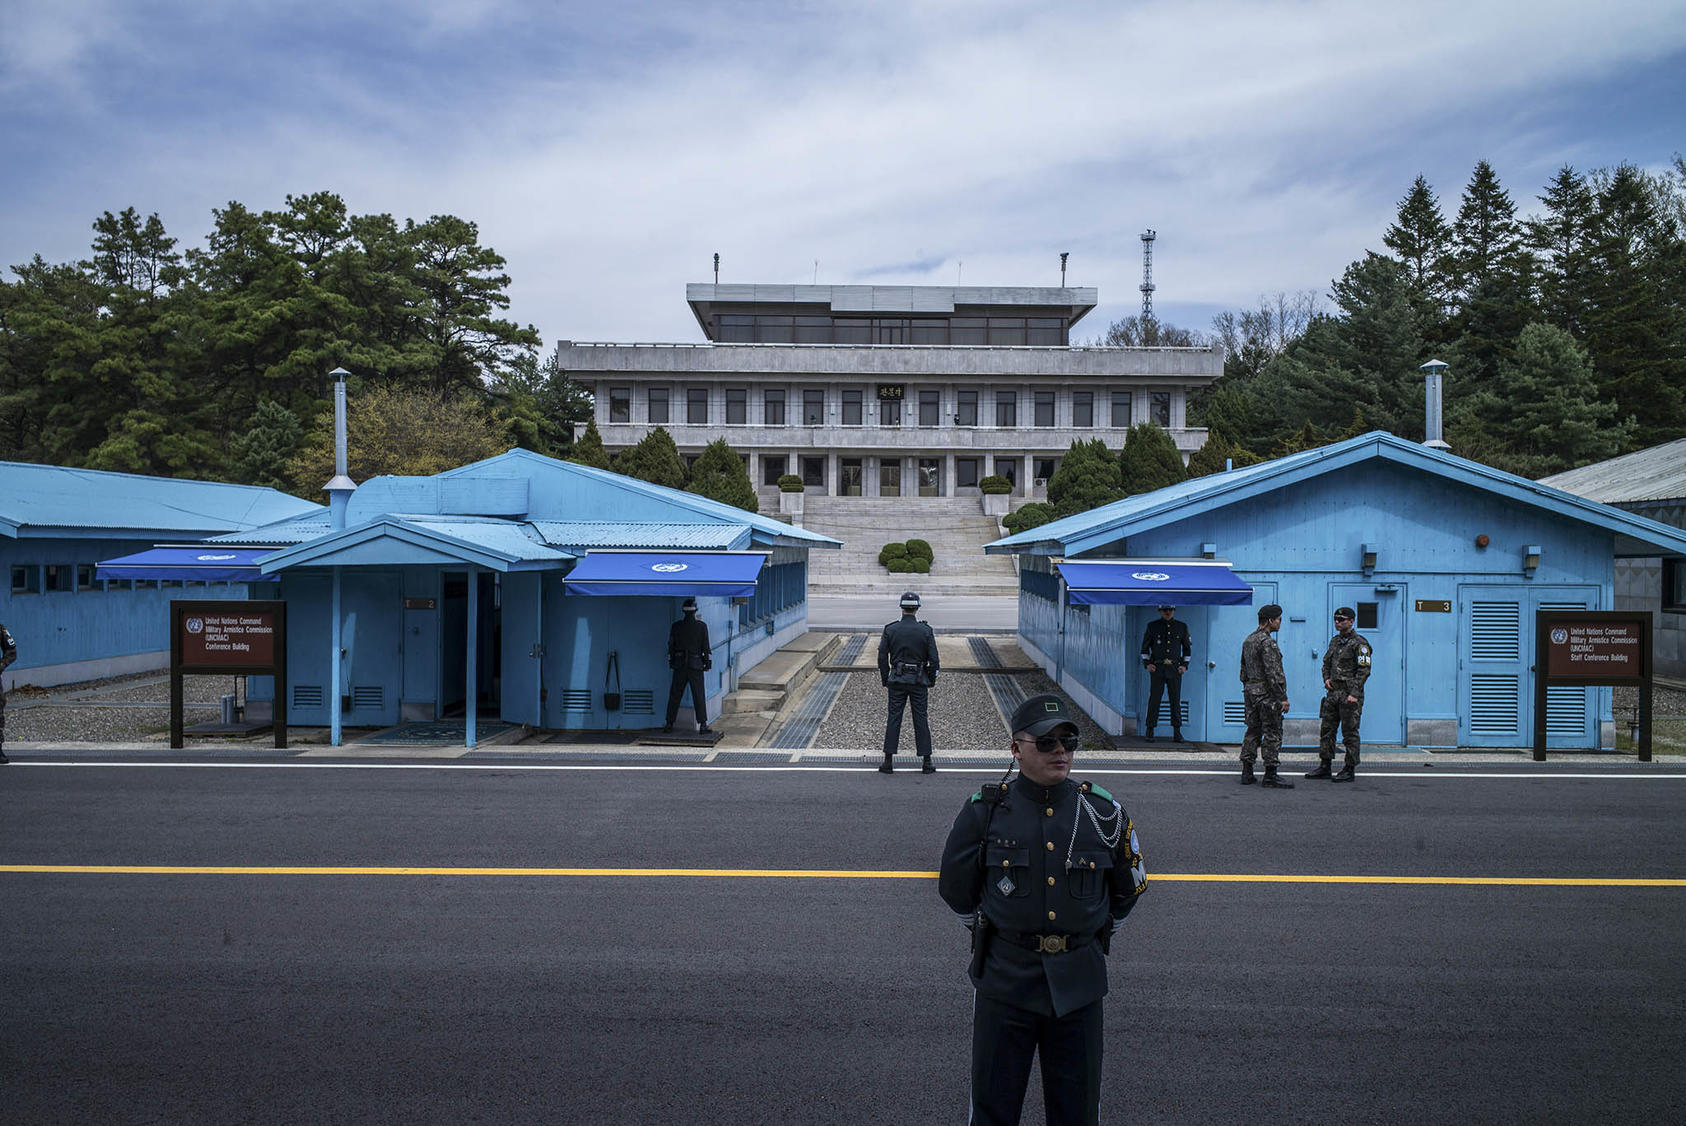 South Korean soldiers stand guard outside the meeting rooms that straddle the border with North Korea in Panmunjom, a so-called truce village, in the Demilitarized Zone, April 19, 2017. (Lam Yik Fei/The New York Times) 